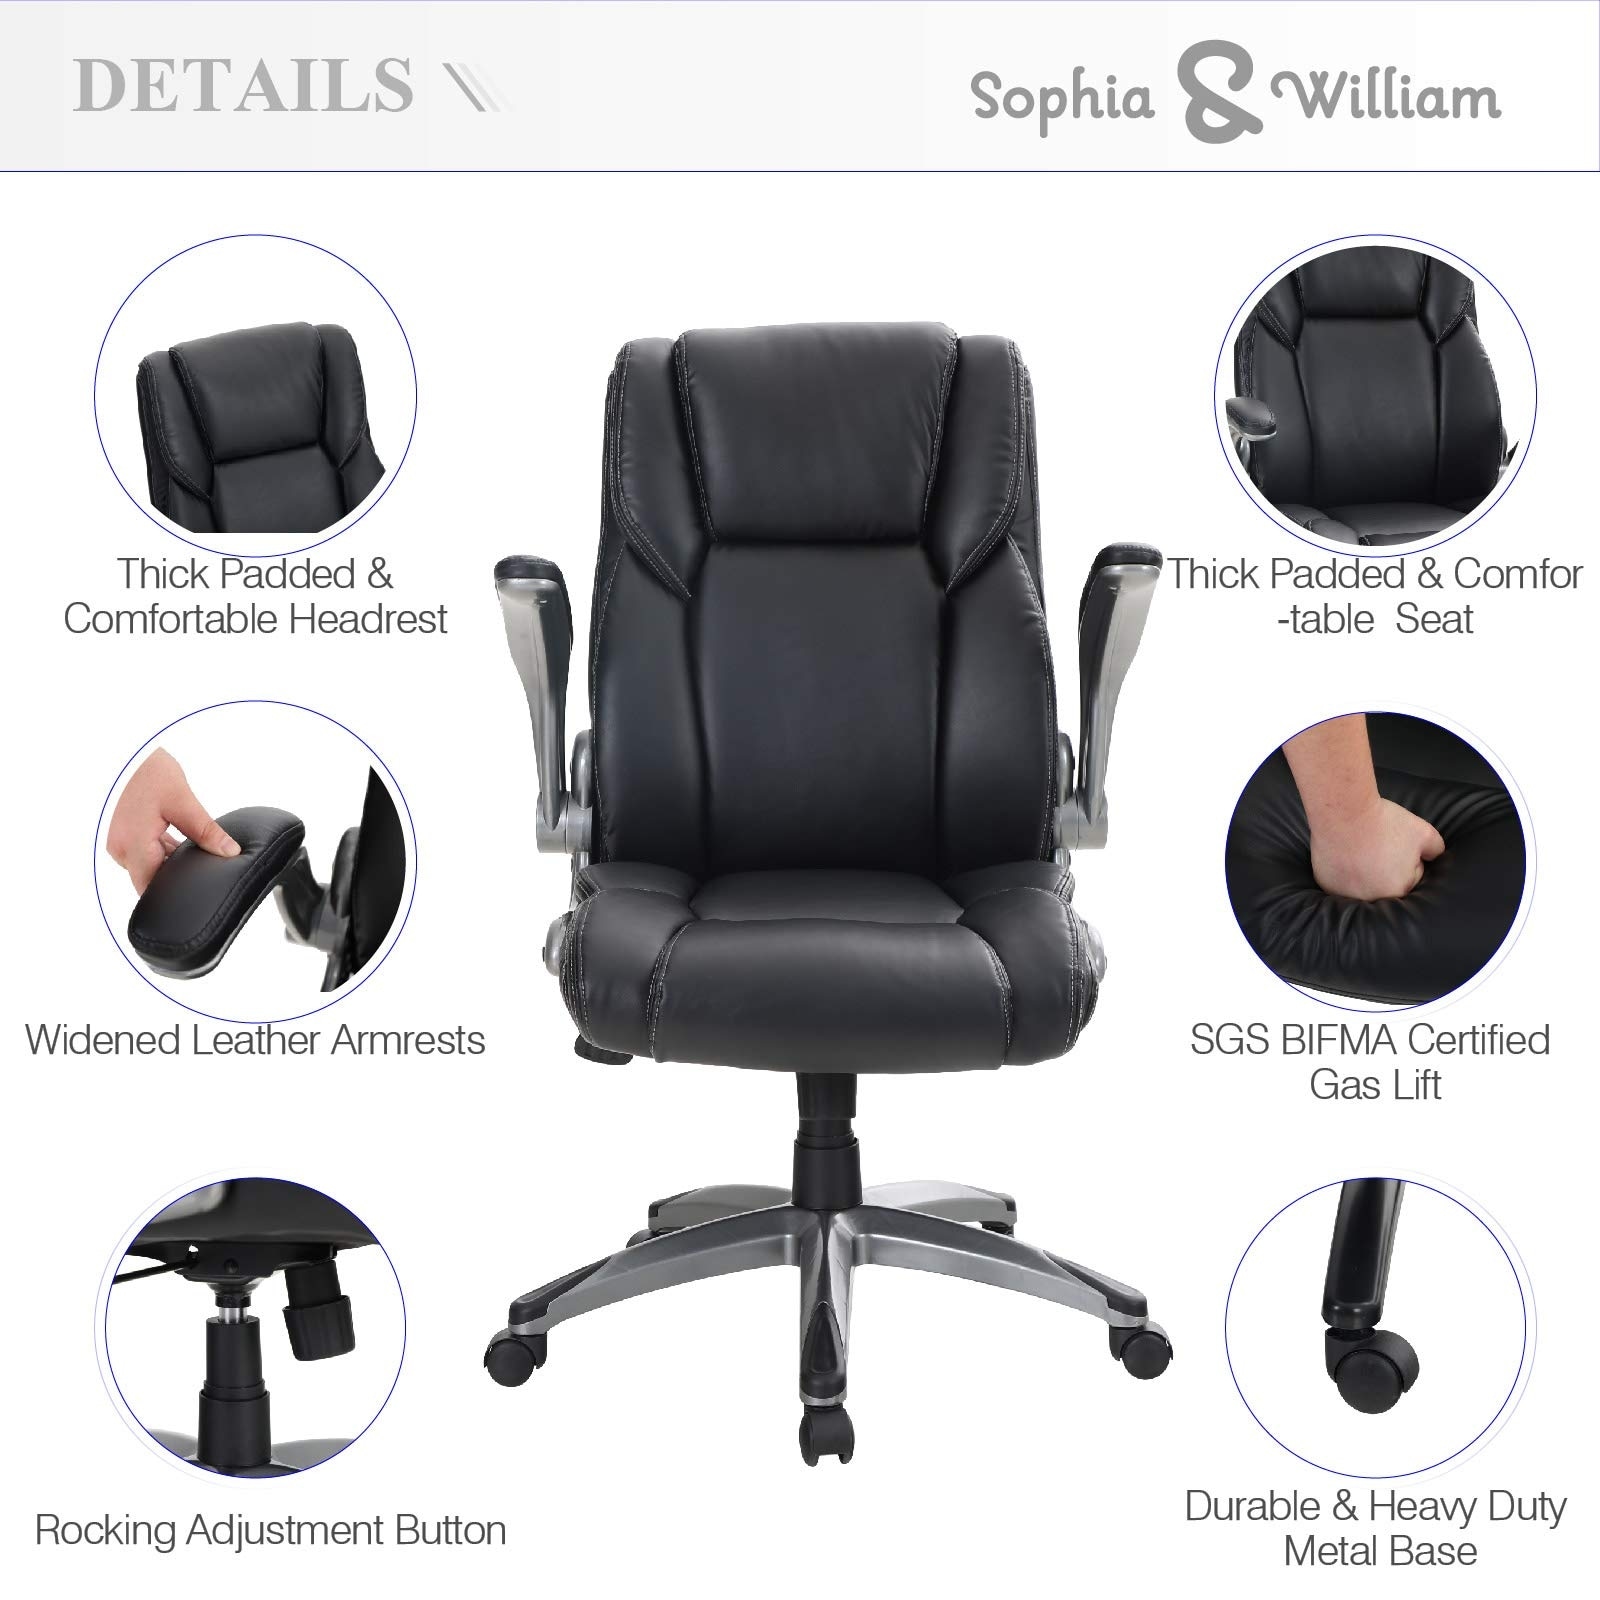 Load Capacity: 300 lbs 1 Pack Modern 360° Swivel Executive Computer Chair with Height Adjustable Armrests Lumbar Support Sophia & William Ergonomic Rocking Mesh Office Desk Chair High Back Black